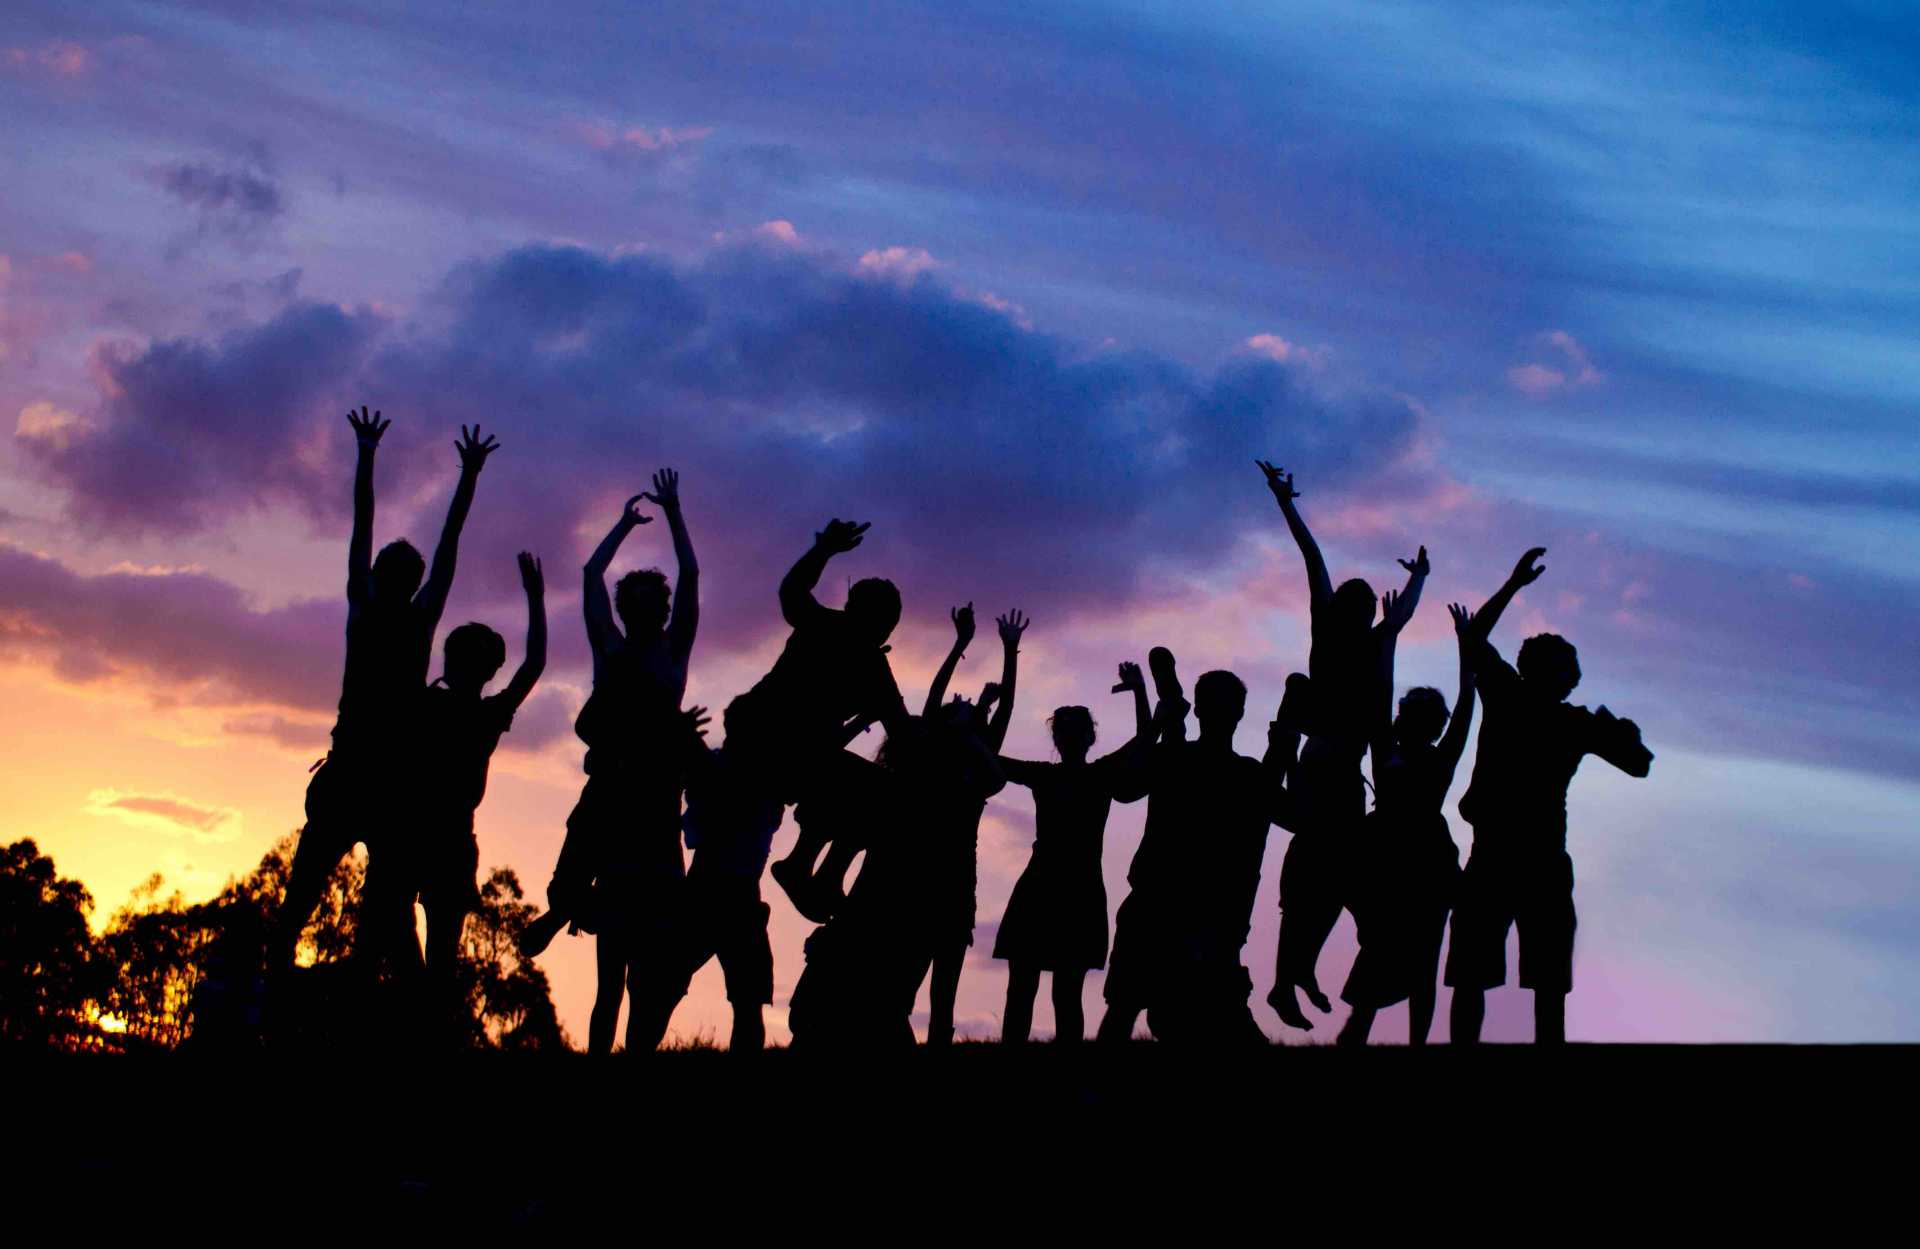 A silhouette of a group of kids jumping up, with the sunset behind them